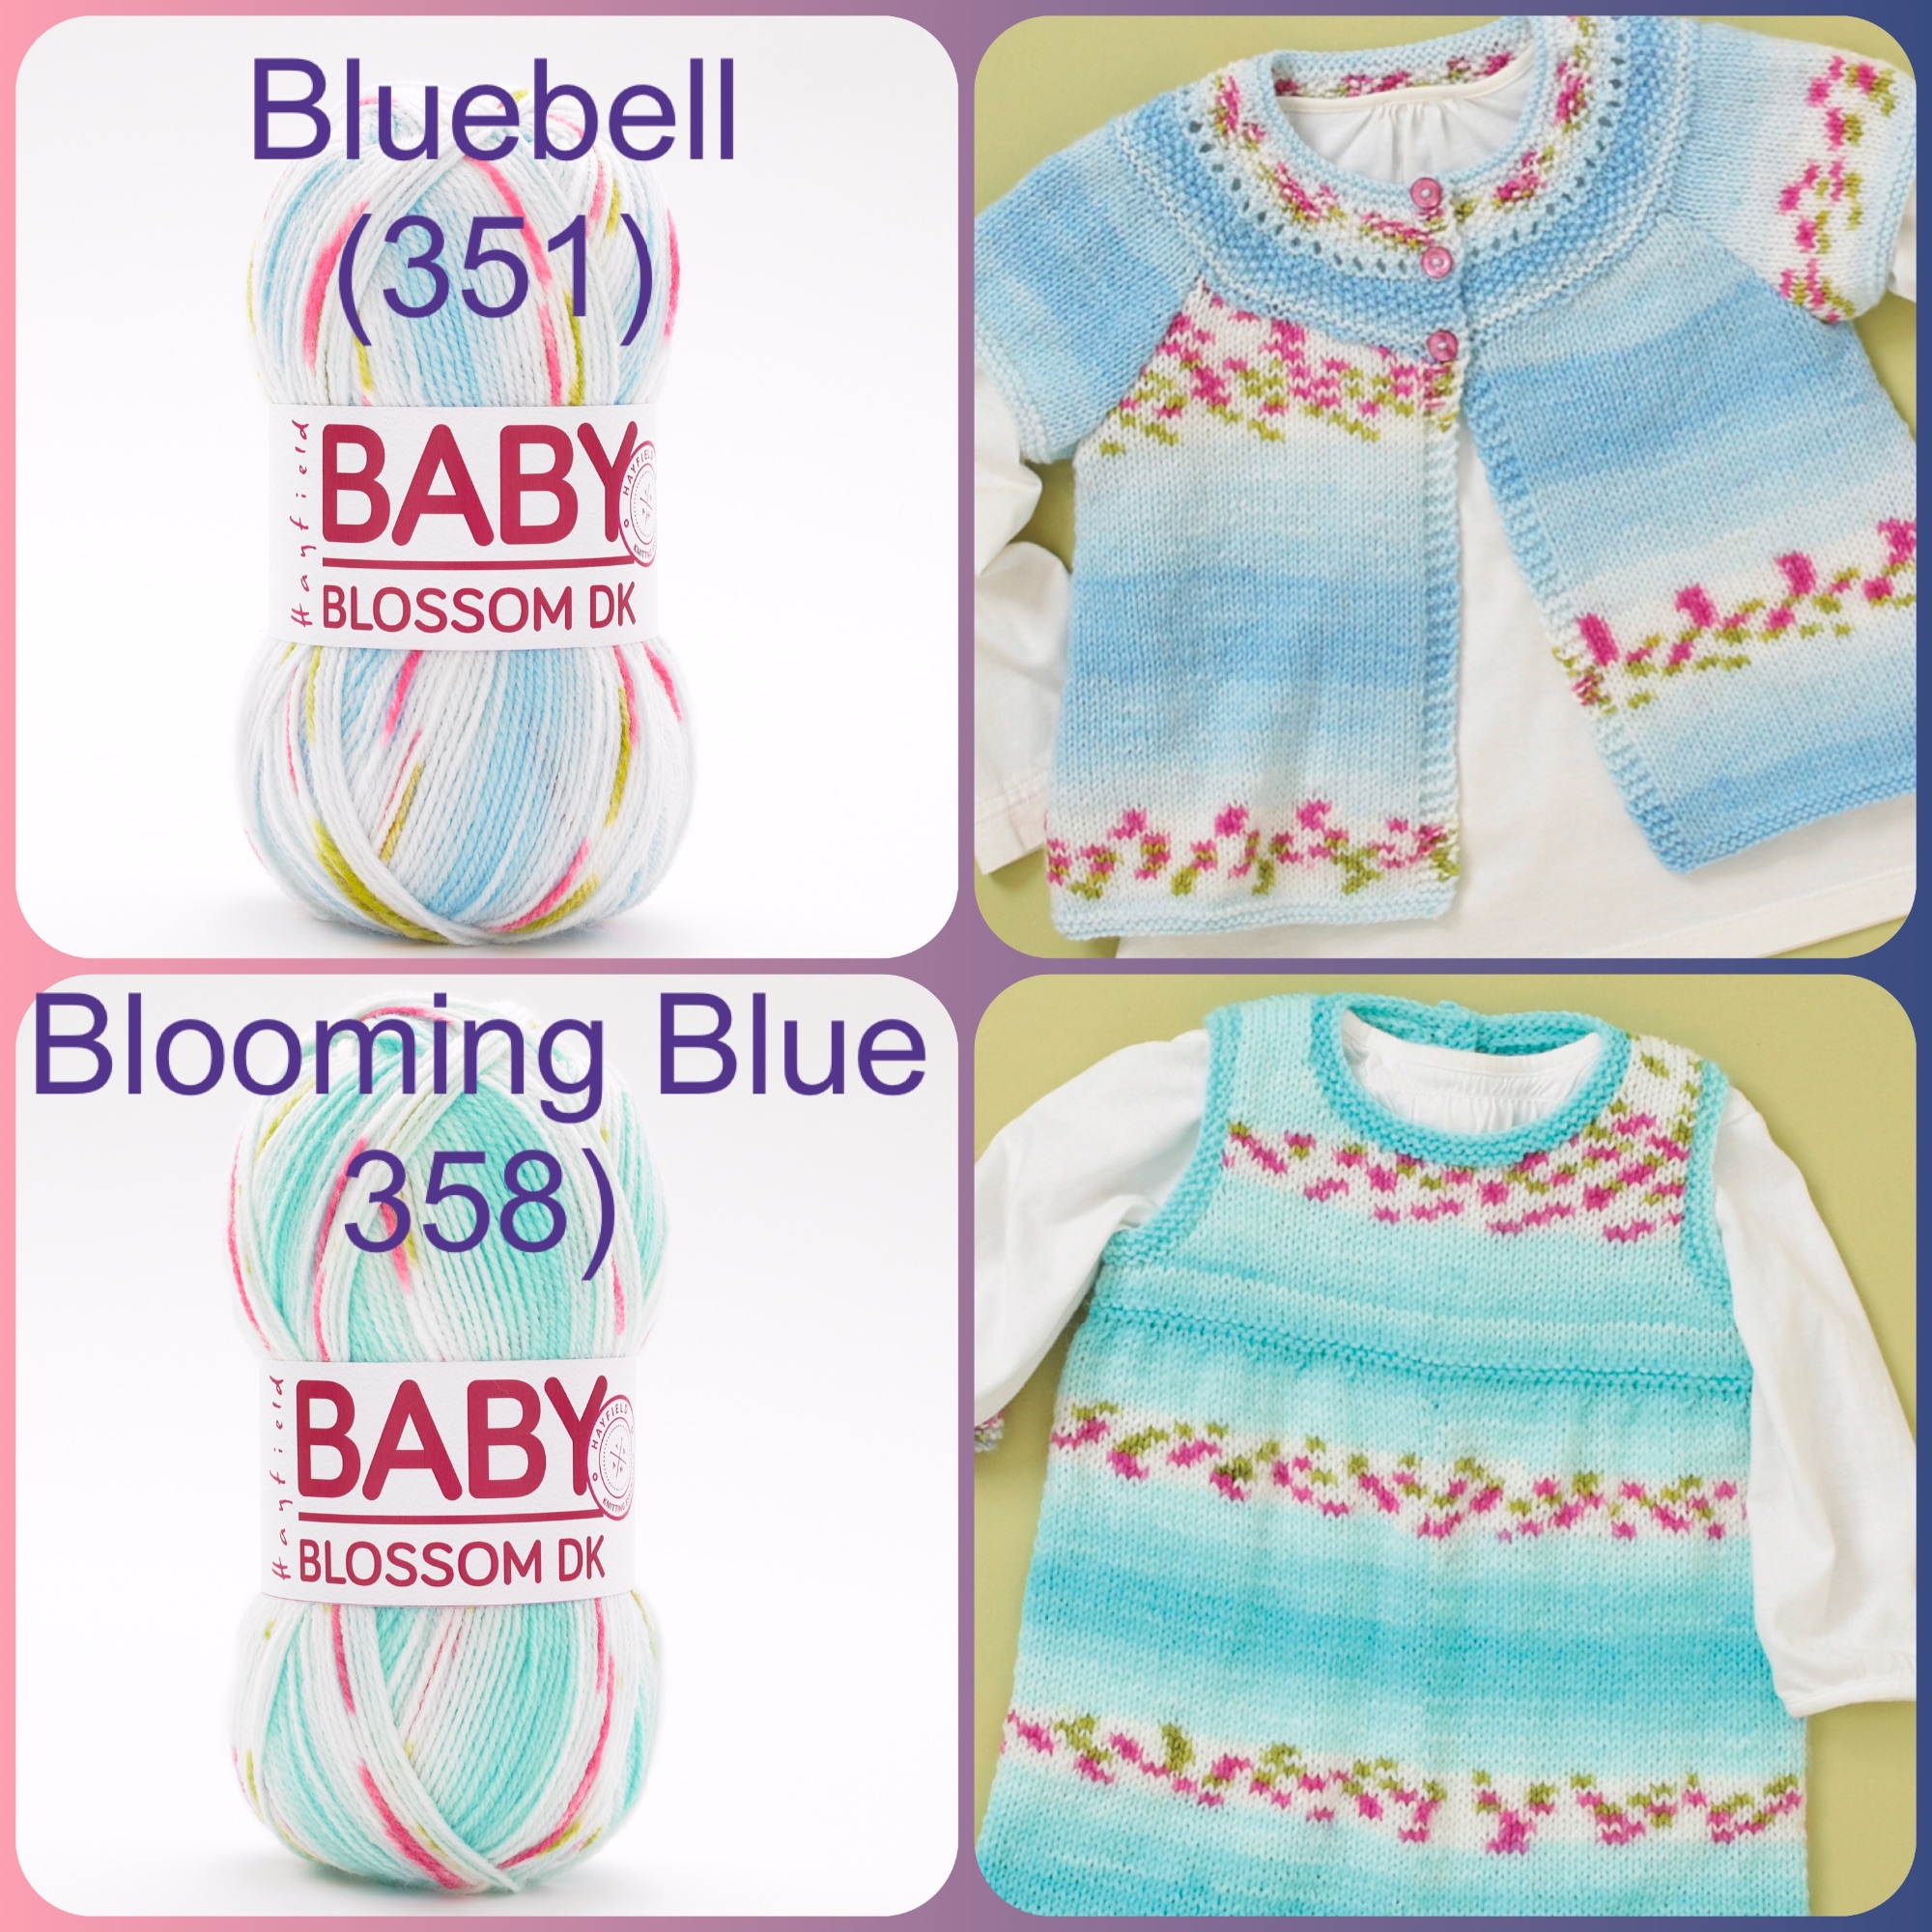 Heayfield baby blossom dk bluebell blooming blue yarn ball and patterns